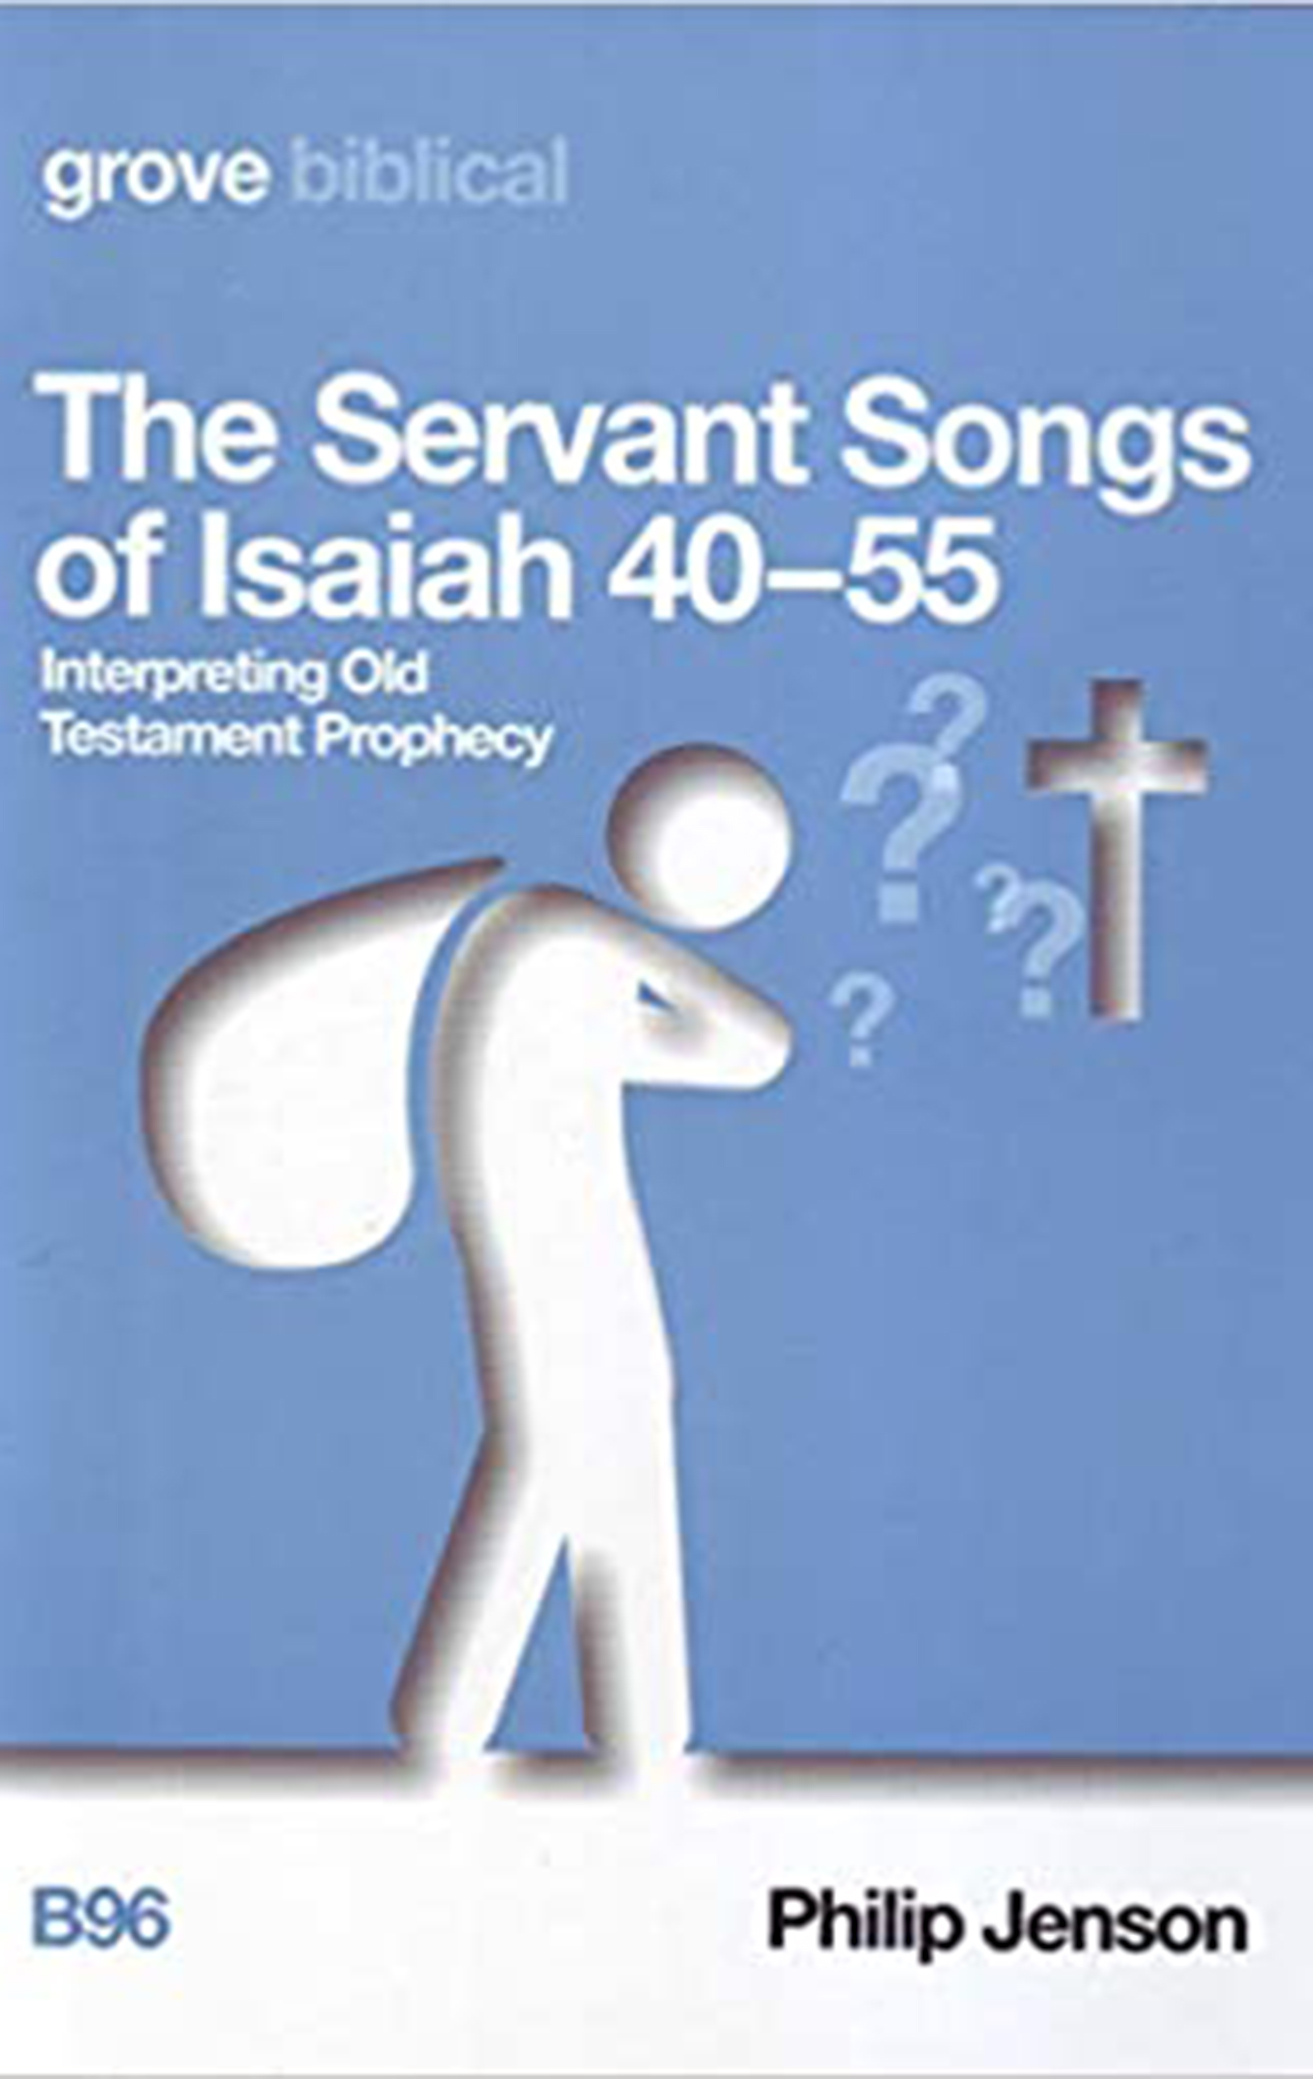 The Servant Songs of Isaiah 40-55